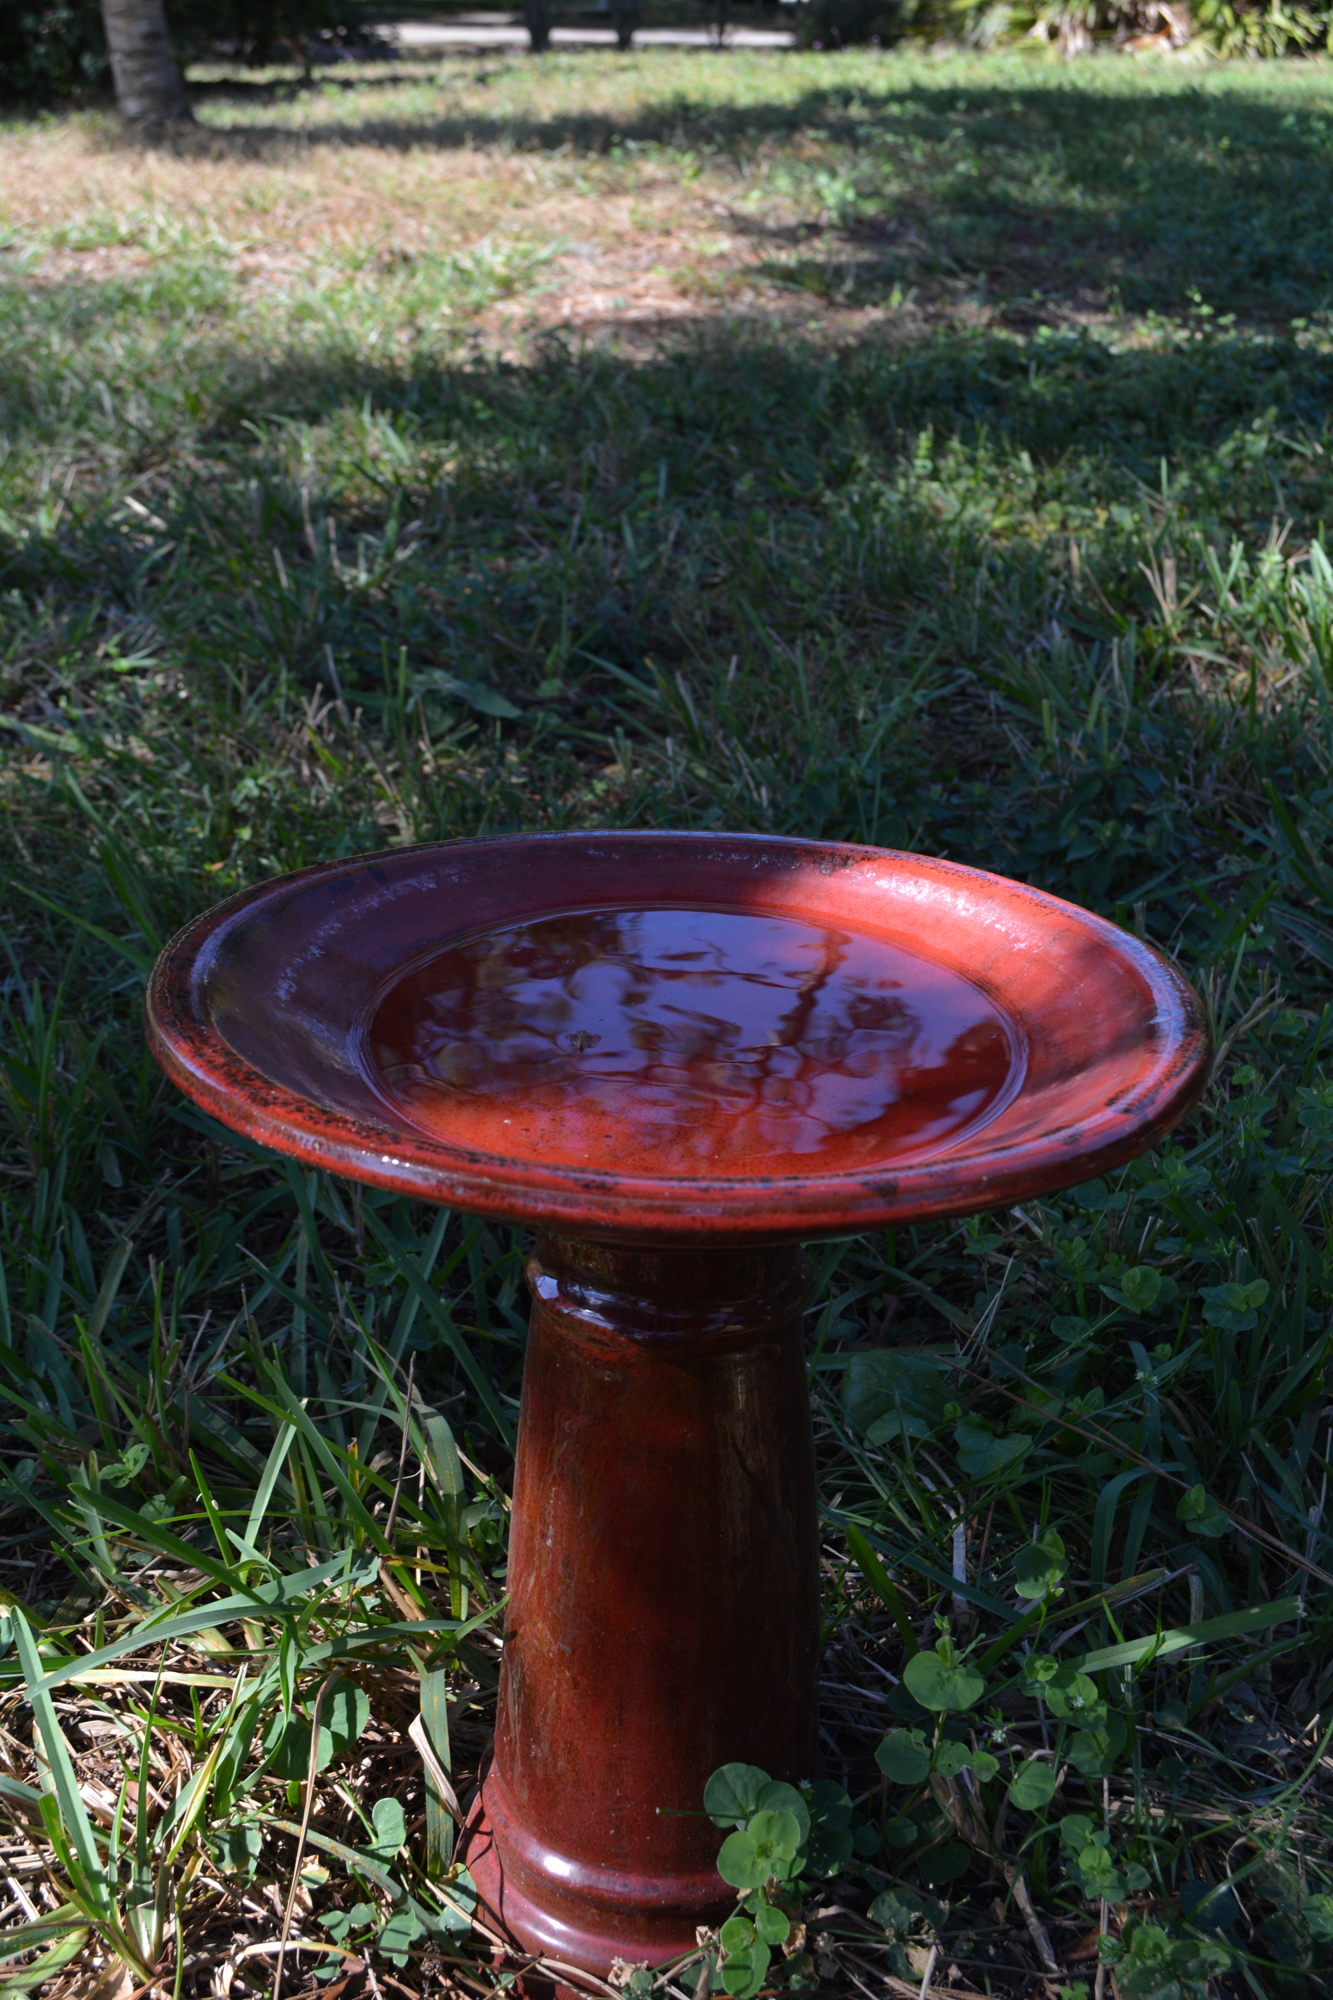 Bird baths should be kept full of fresh water and cleaned of debris. Having fresh water is a major attractor for birds.